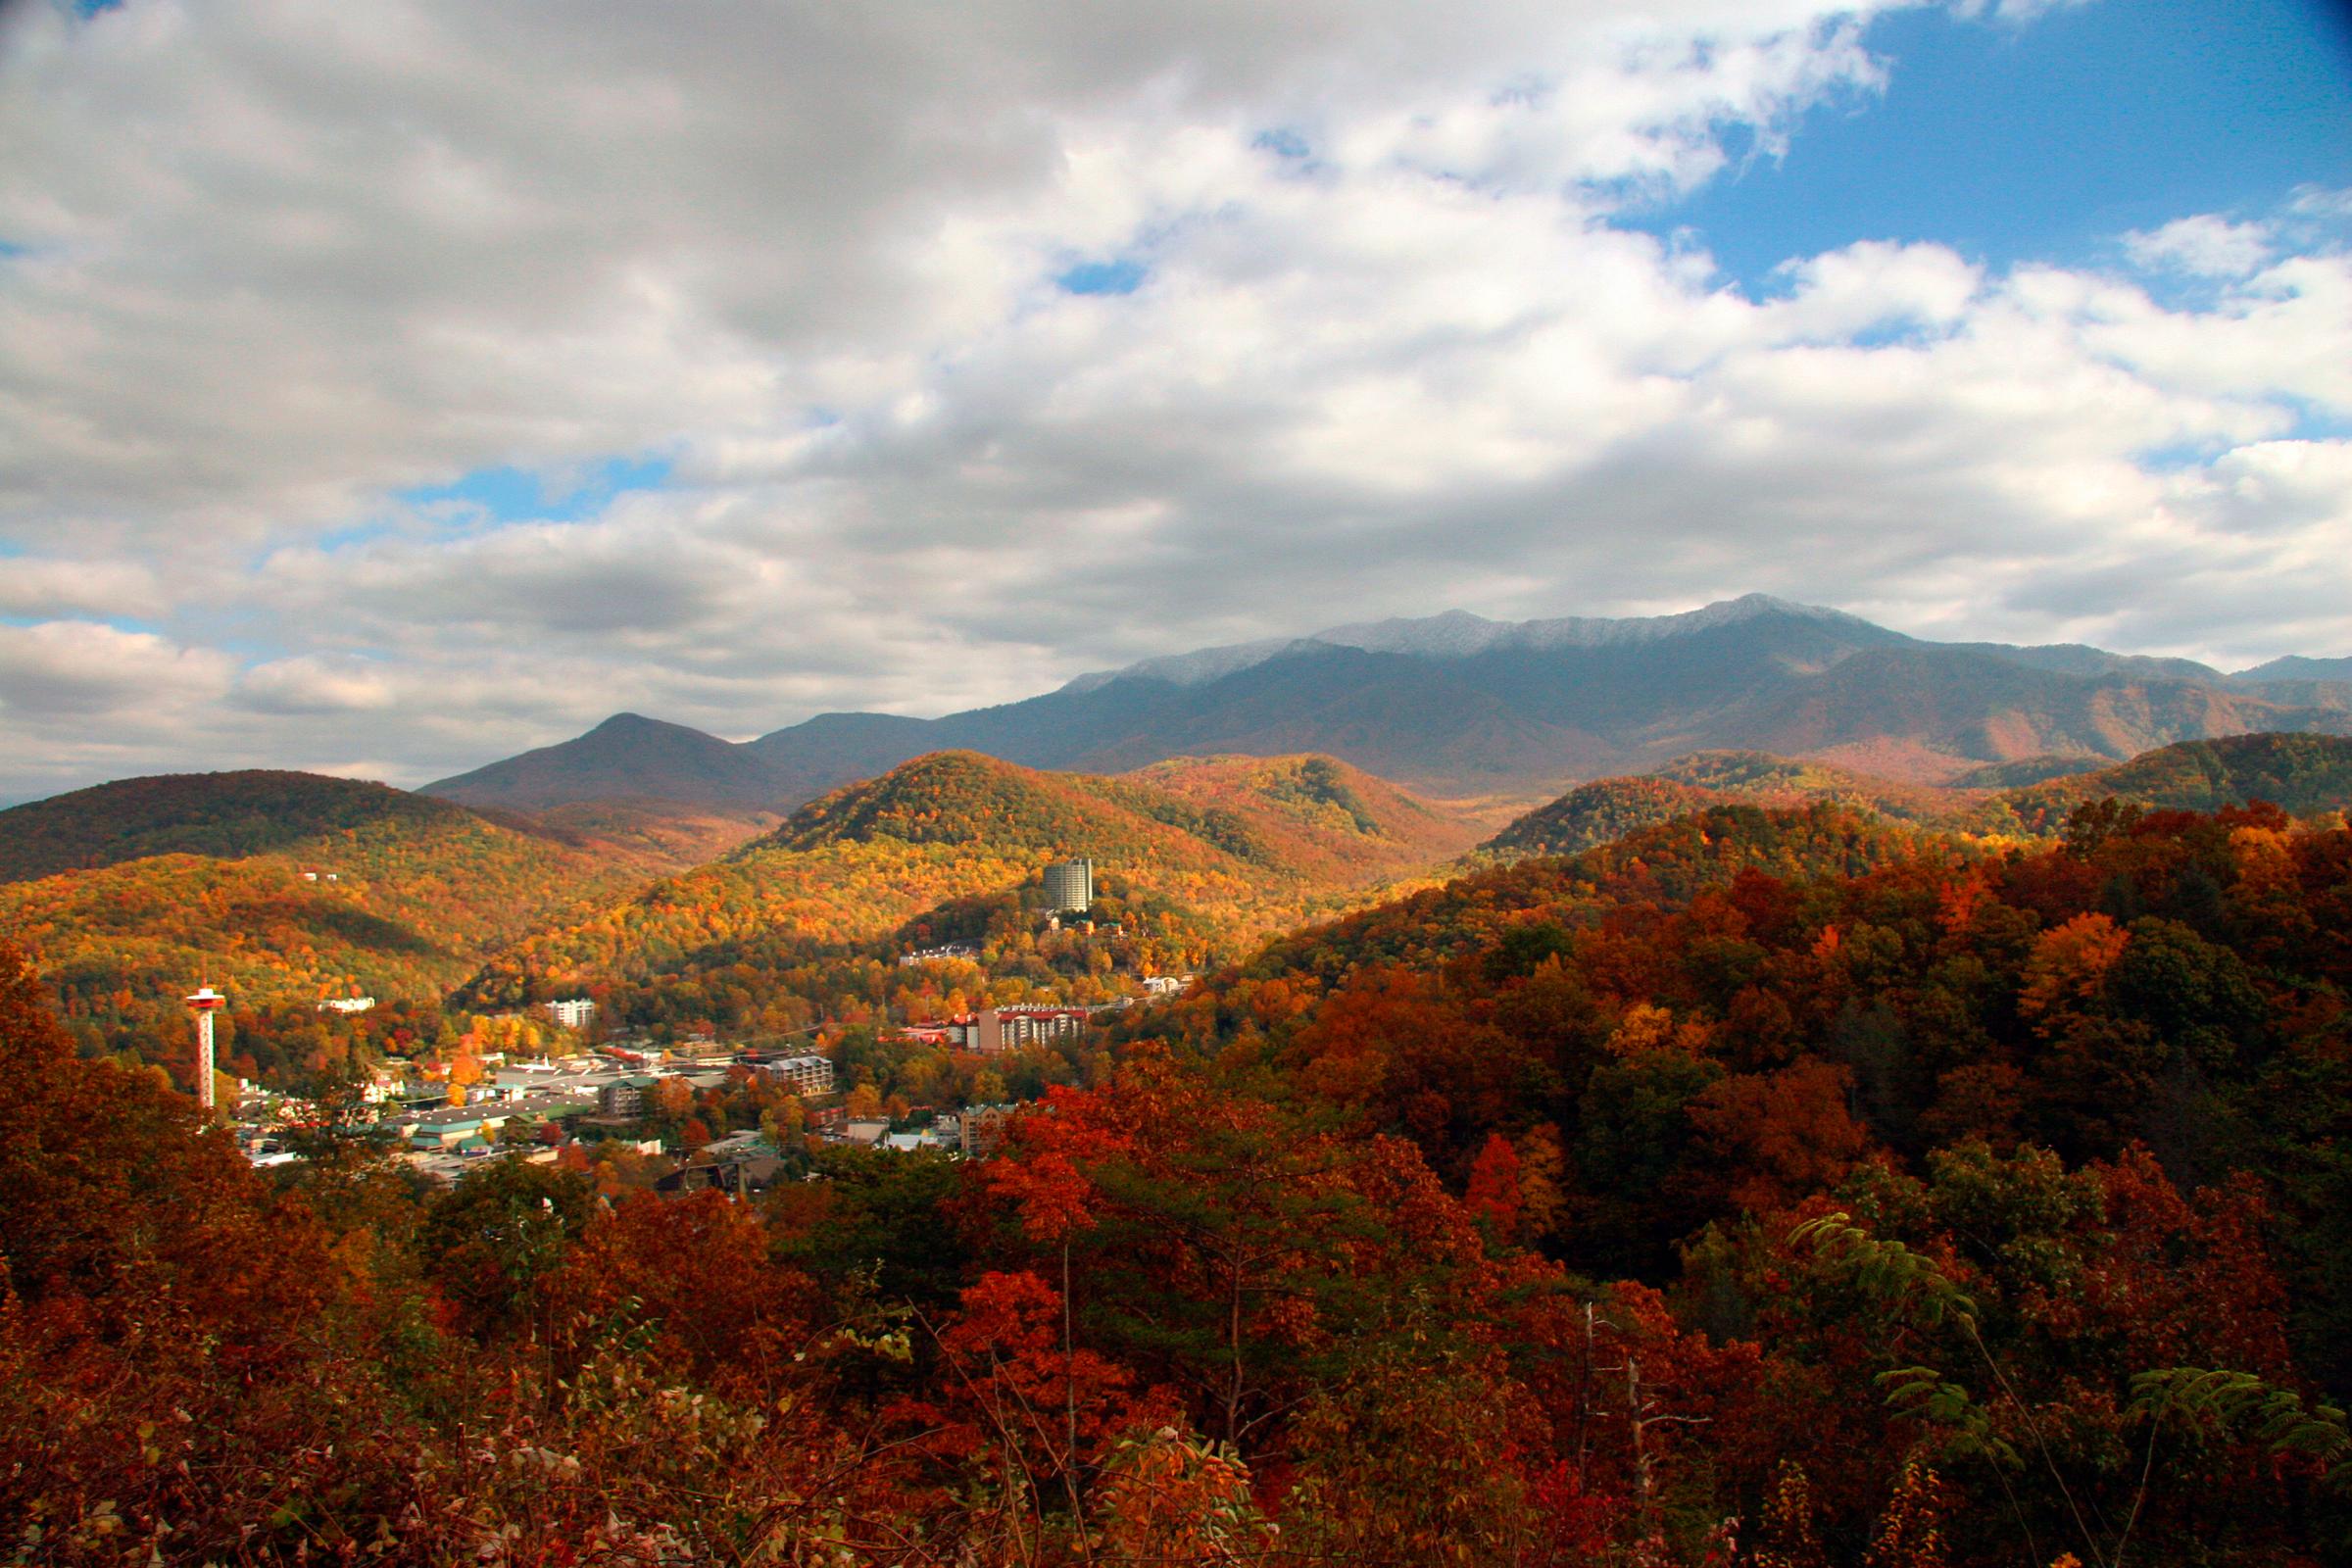 View of Gatlinburg from mountain road, Tennessee, USA